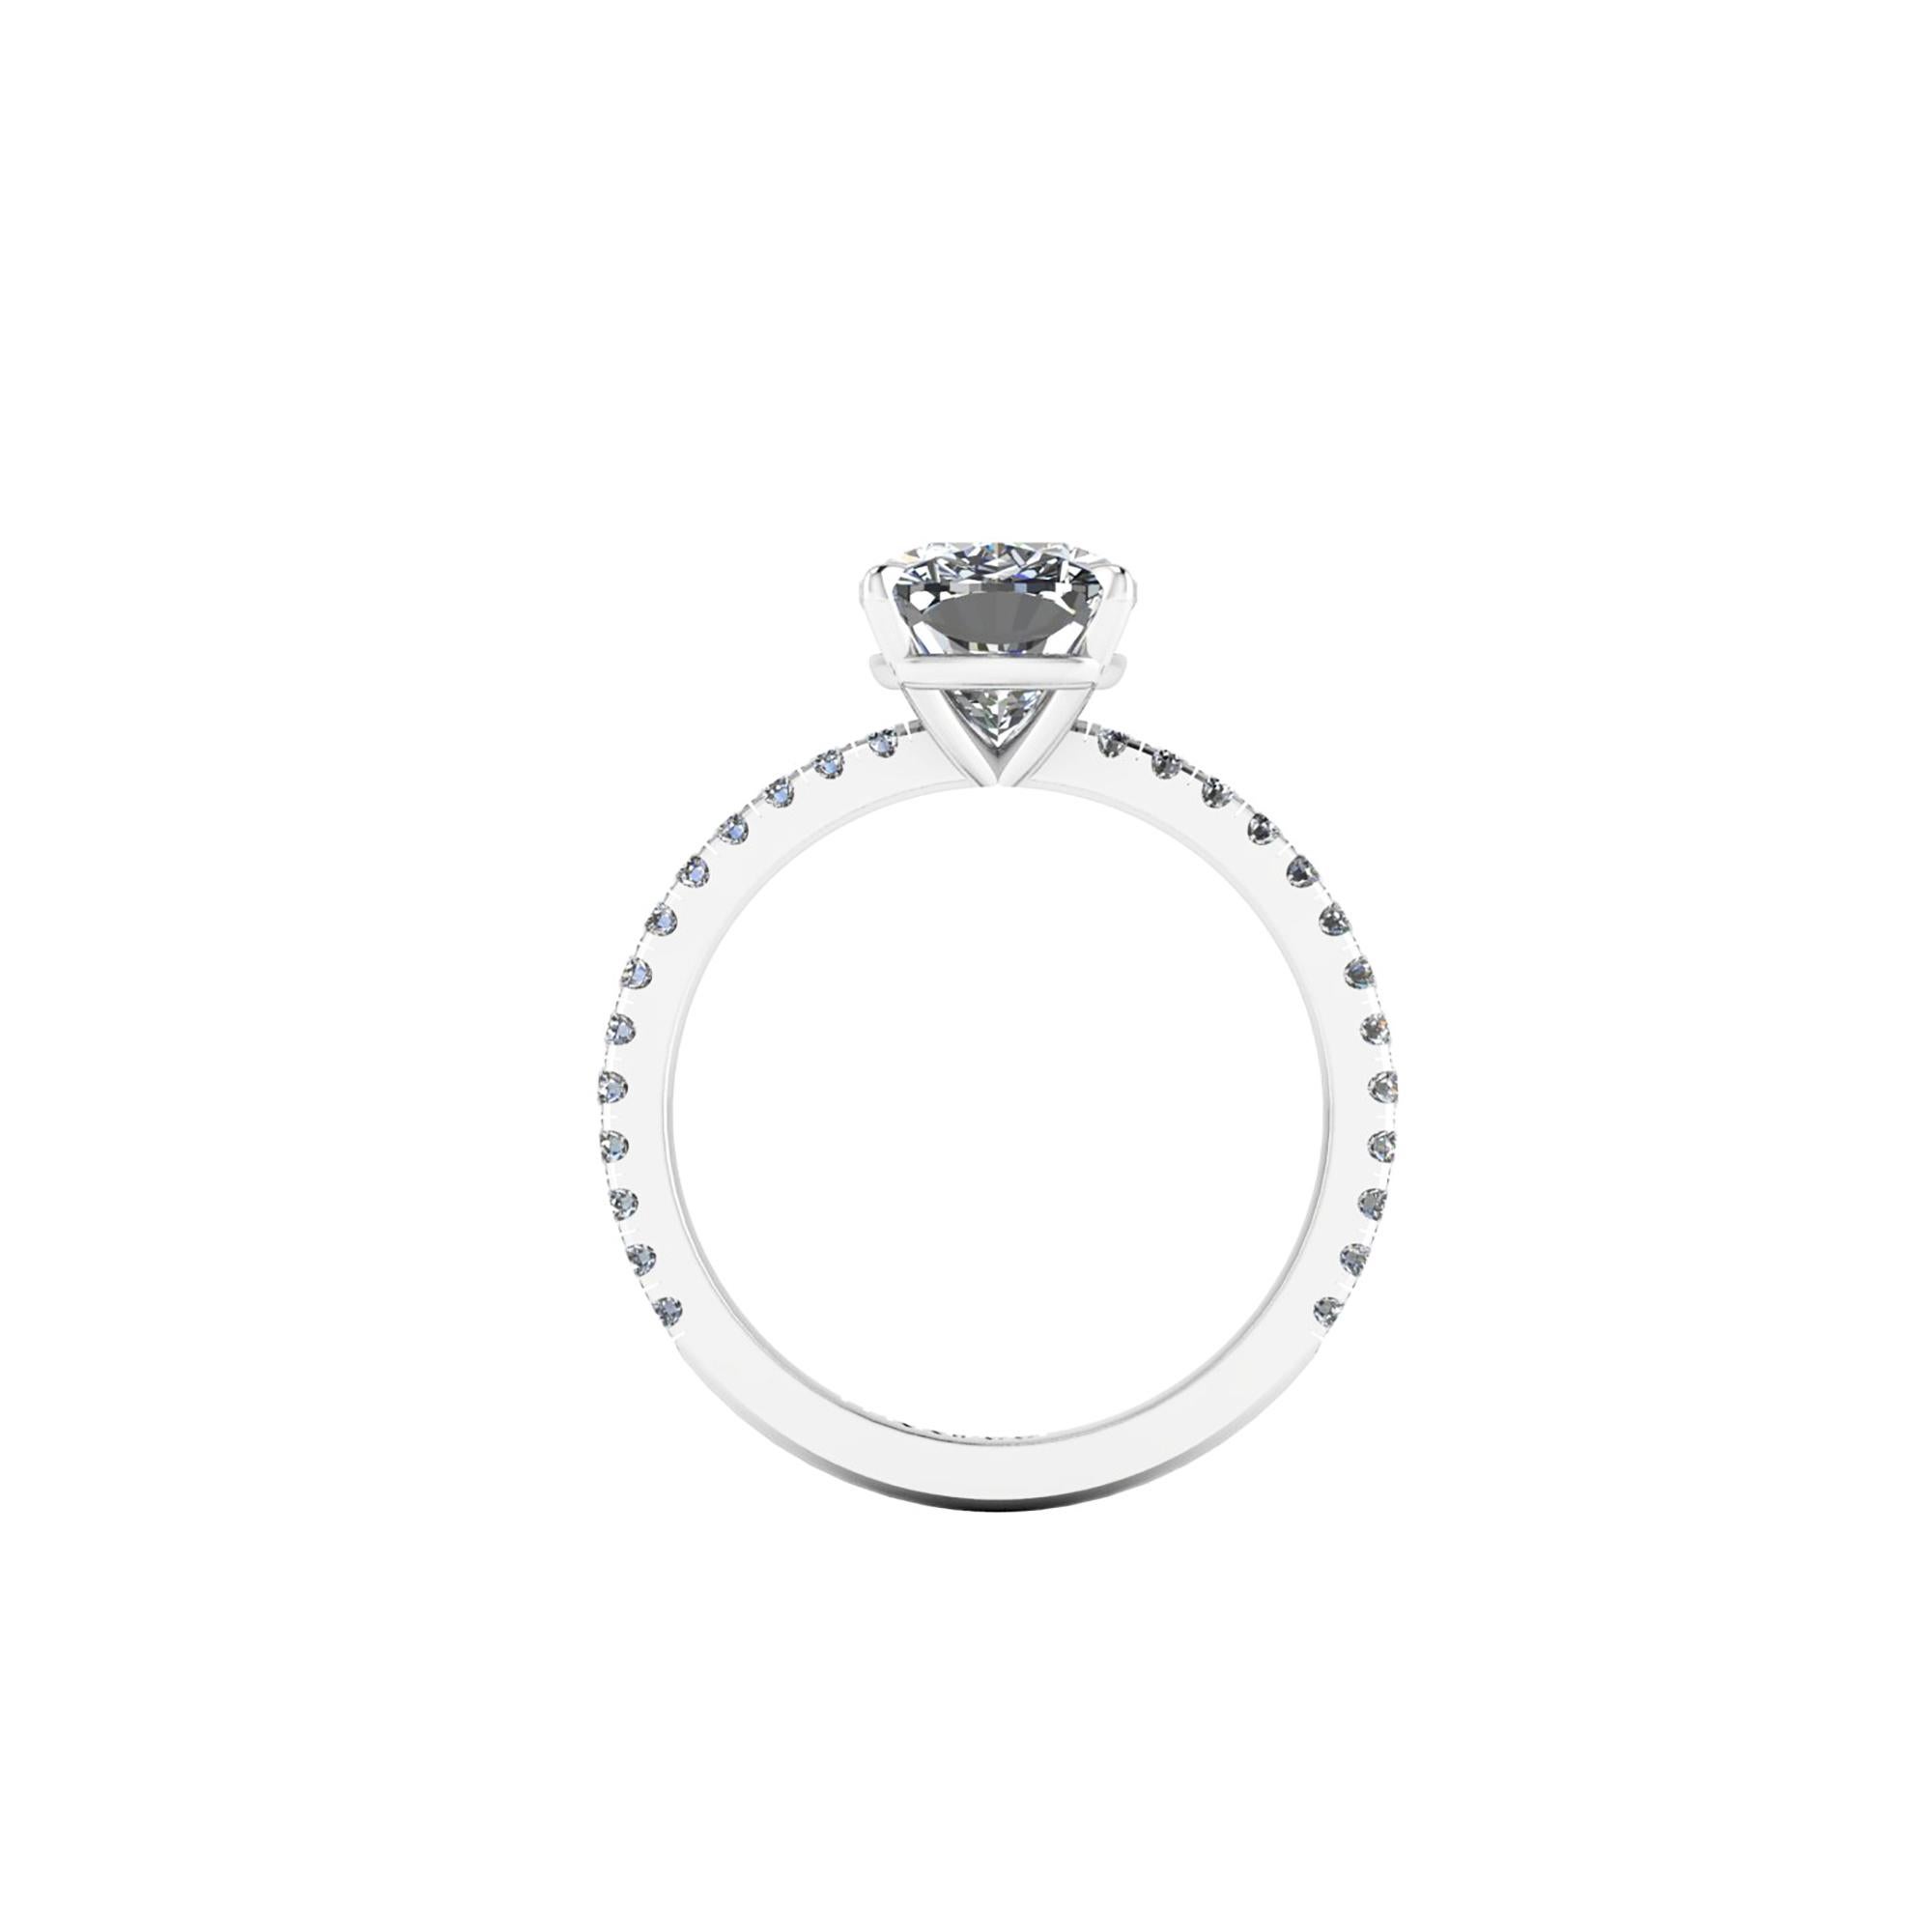 GIA Certified 2.01 carat Cushion diamond,H color,  SI2 clarity,  set in a 0.28 carat Pave diamond set engagement ring made in Platinum 950

The ring size is a 5.75, we offer complimentary sizing upon order